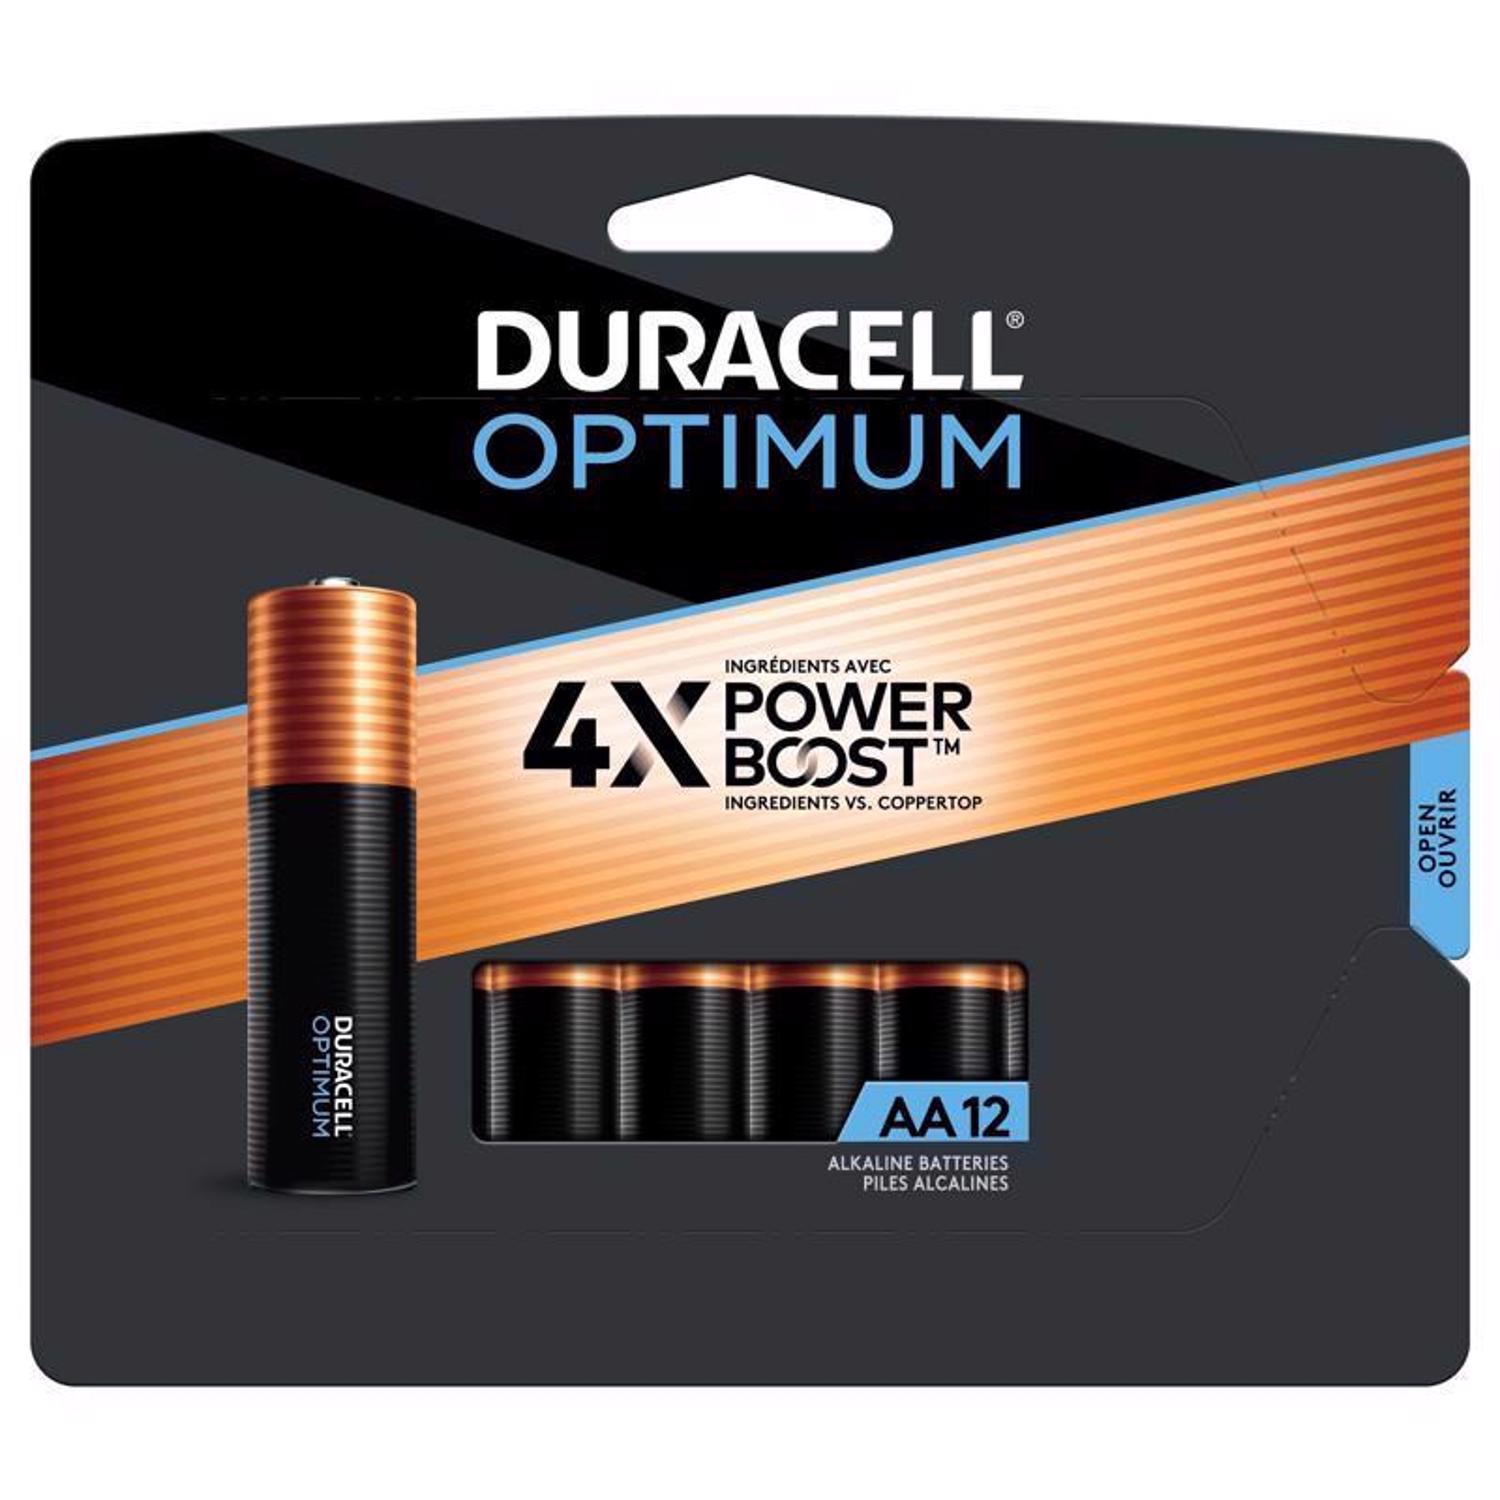 Photos - Household Switch Duracell Optimum AA Alkaline Batteries 12 pk Carded 032587 